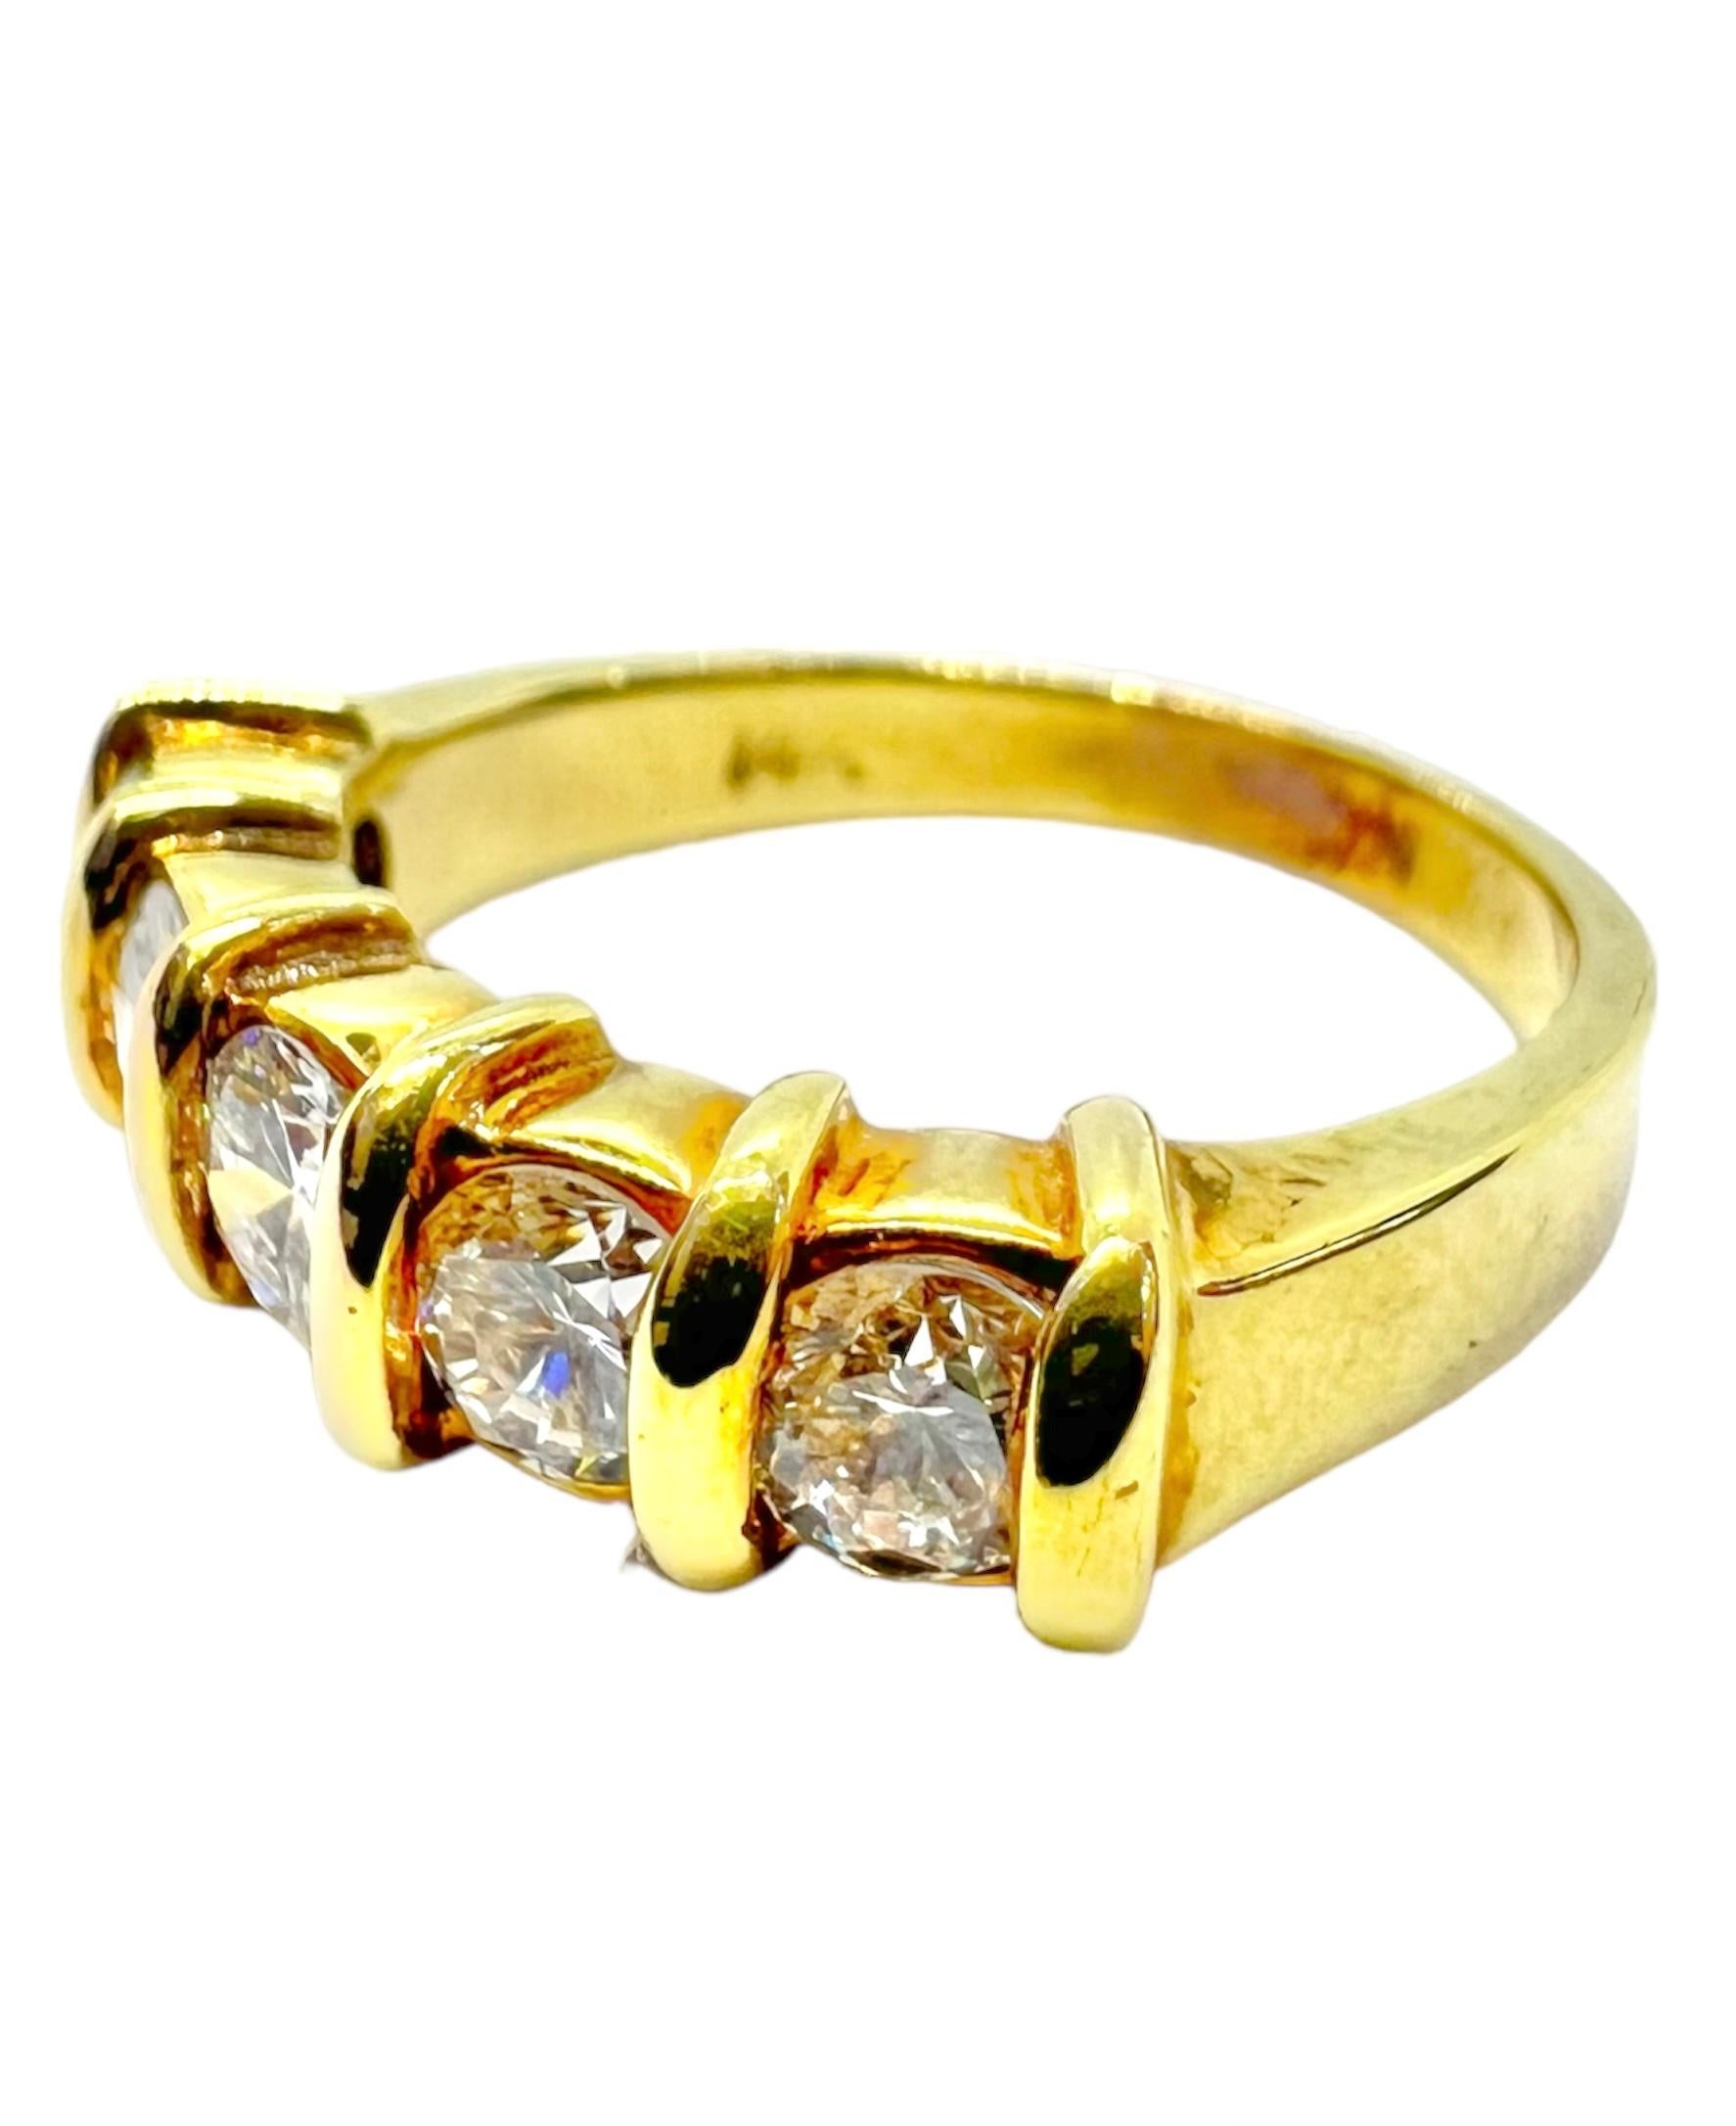 14K yellow gold ring with 5 round diamonds.

Sophia D by Joseph Dardashti LTD has been known worldwide for 35 years and are inspired by classic Art Deco design that merges with modern manufacturing techniques.